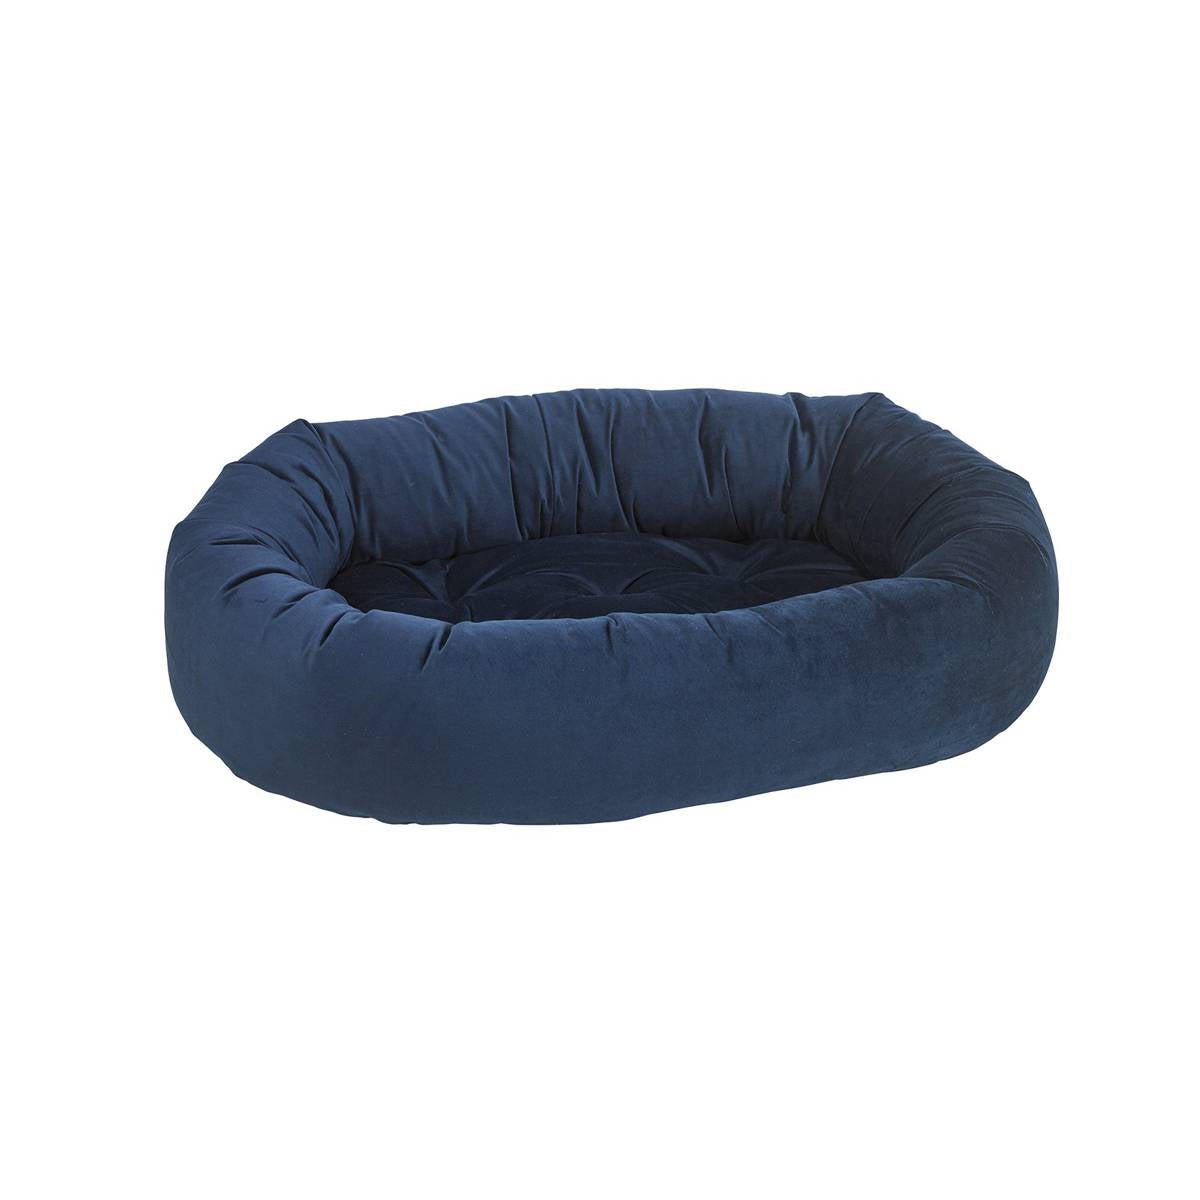 Donut Dog Pet Bed in Navy | Pawlicious & Company